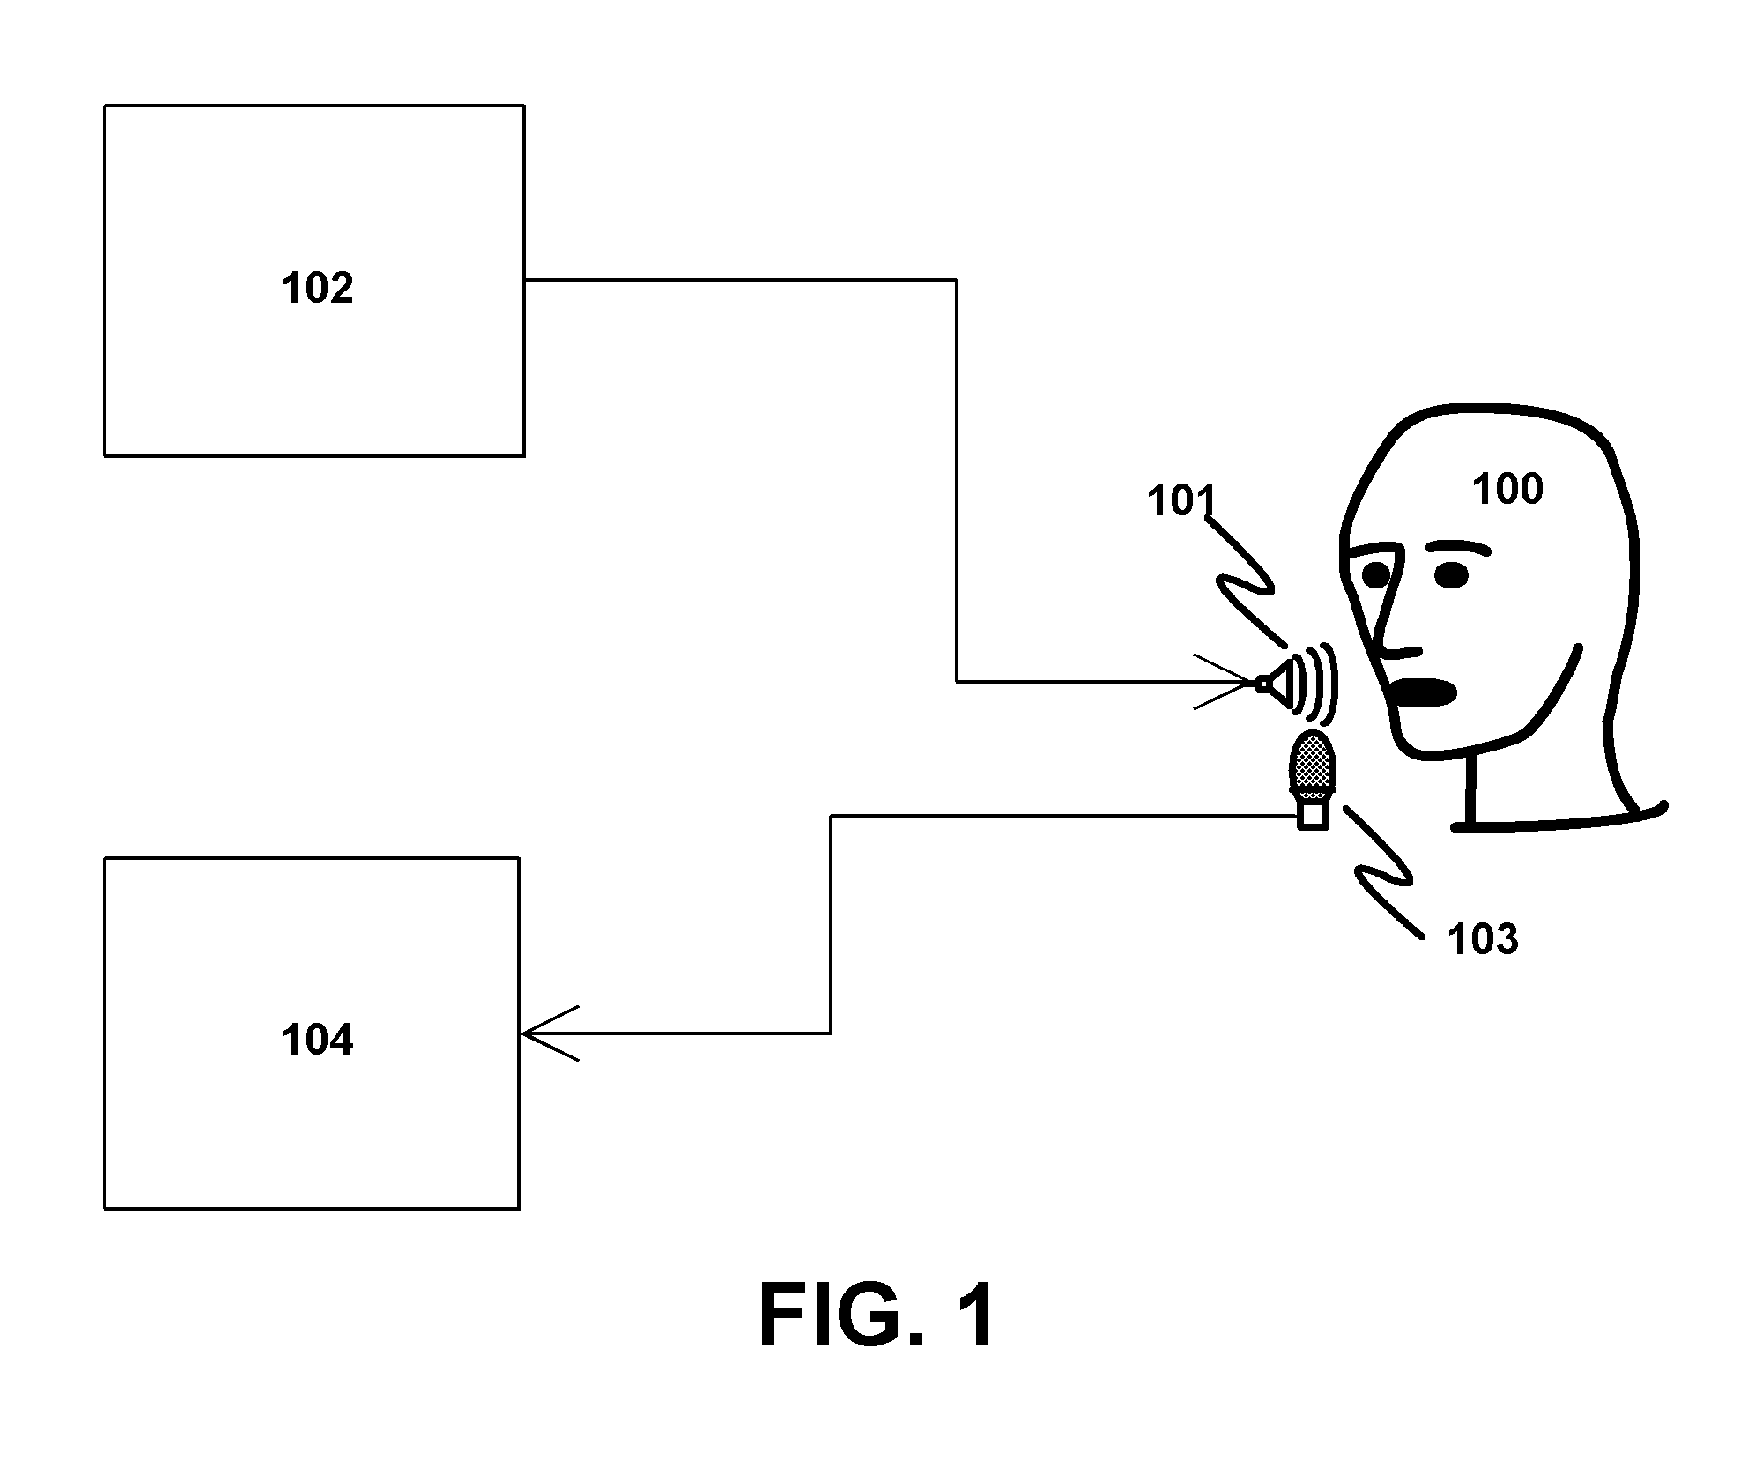 Apparatus and Method for Detecting Speech Using Acoustic Signals Outside the Audible Frequency Range